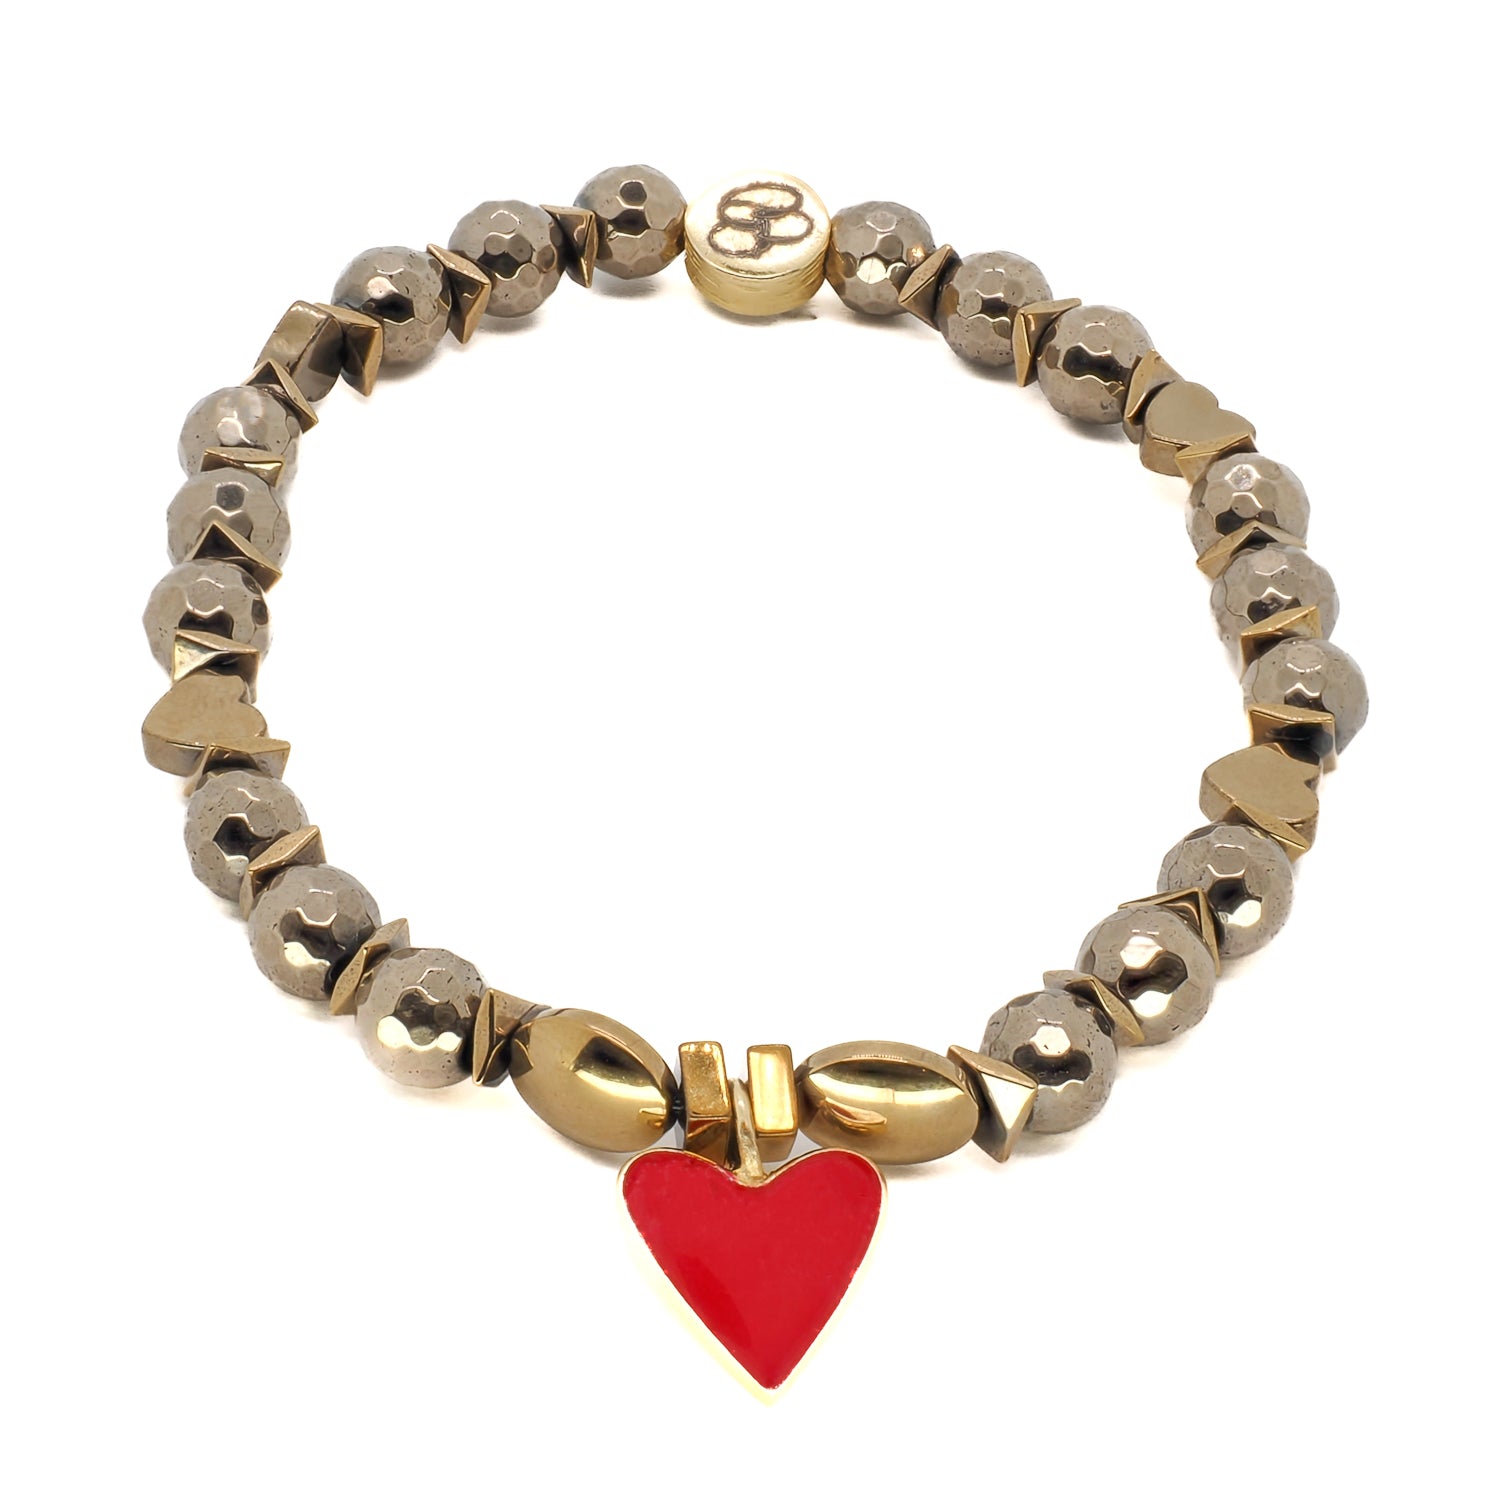 Embrace the essence of love with the Red Heart Love Bracelet, featuring heart-shaped hematite beads and gold-colored accents.